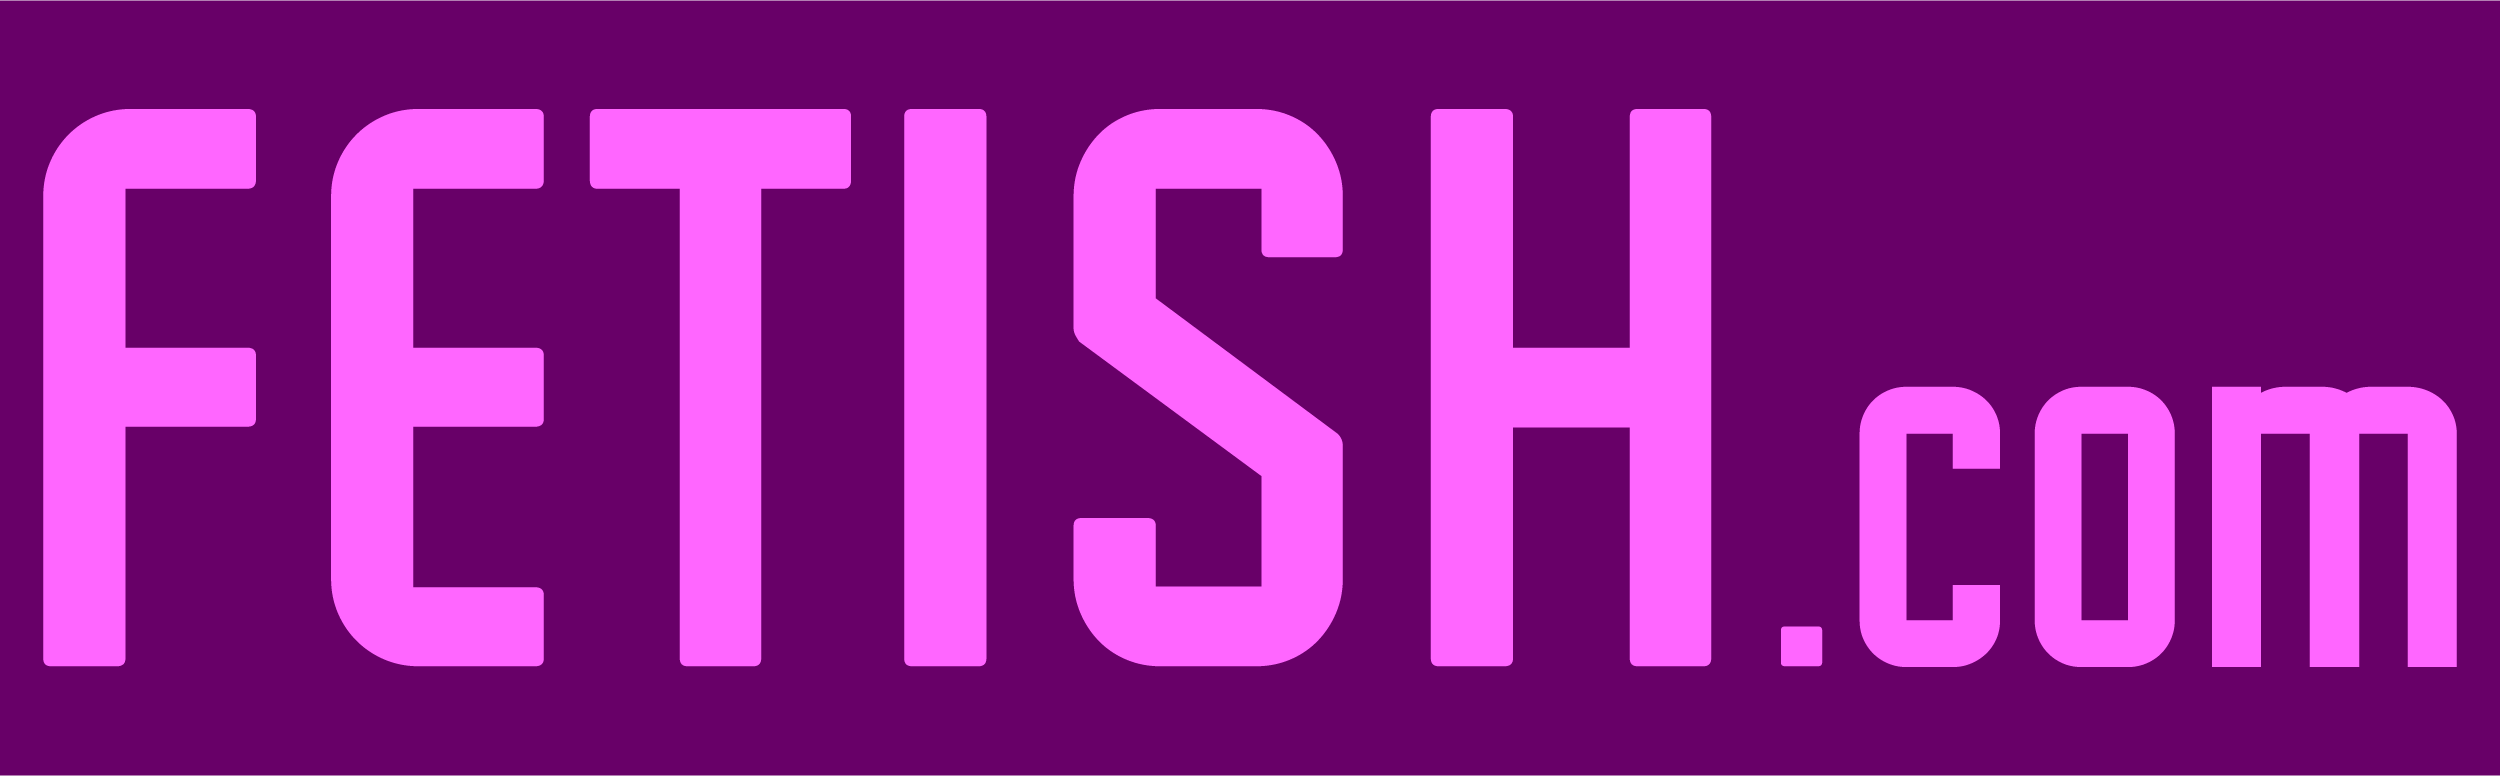 Fetish Wanted Adds Boards Uk